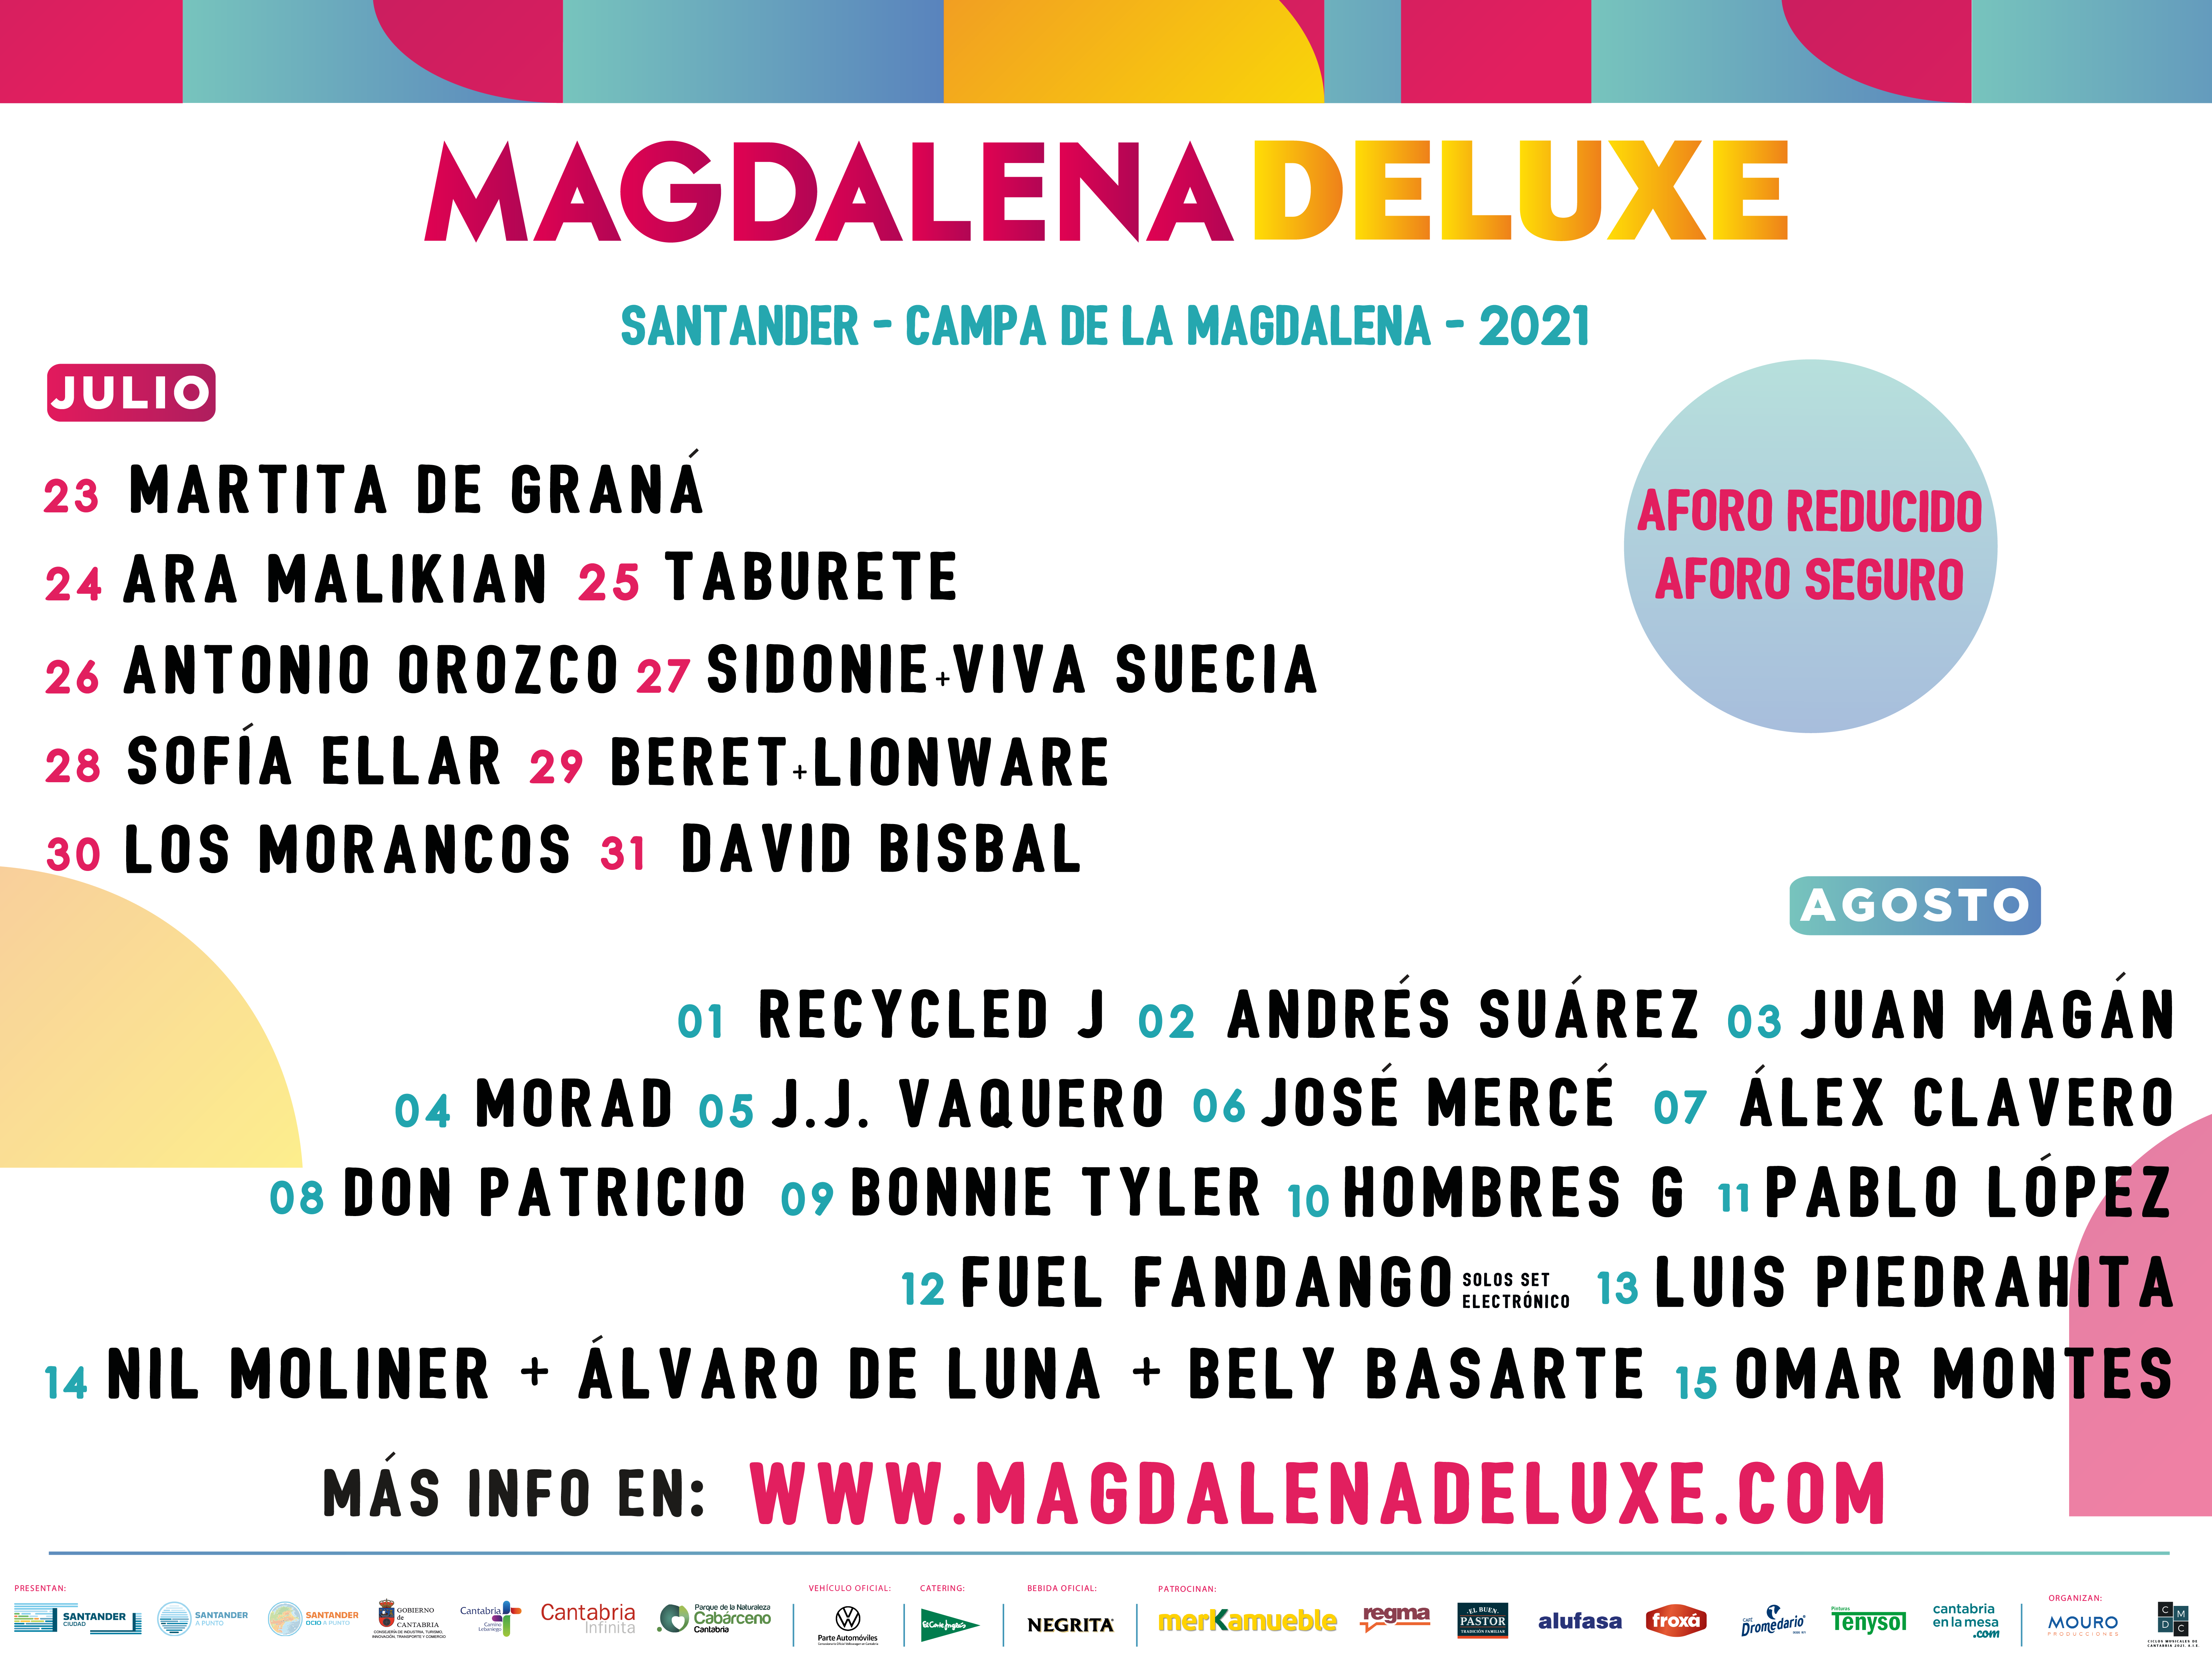 recycled-j-magdalena-deluxe-1-agosto-60d9ac6fc321f1.83337816.png